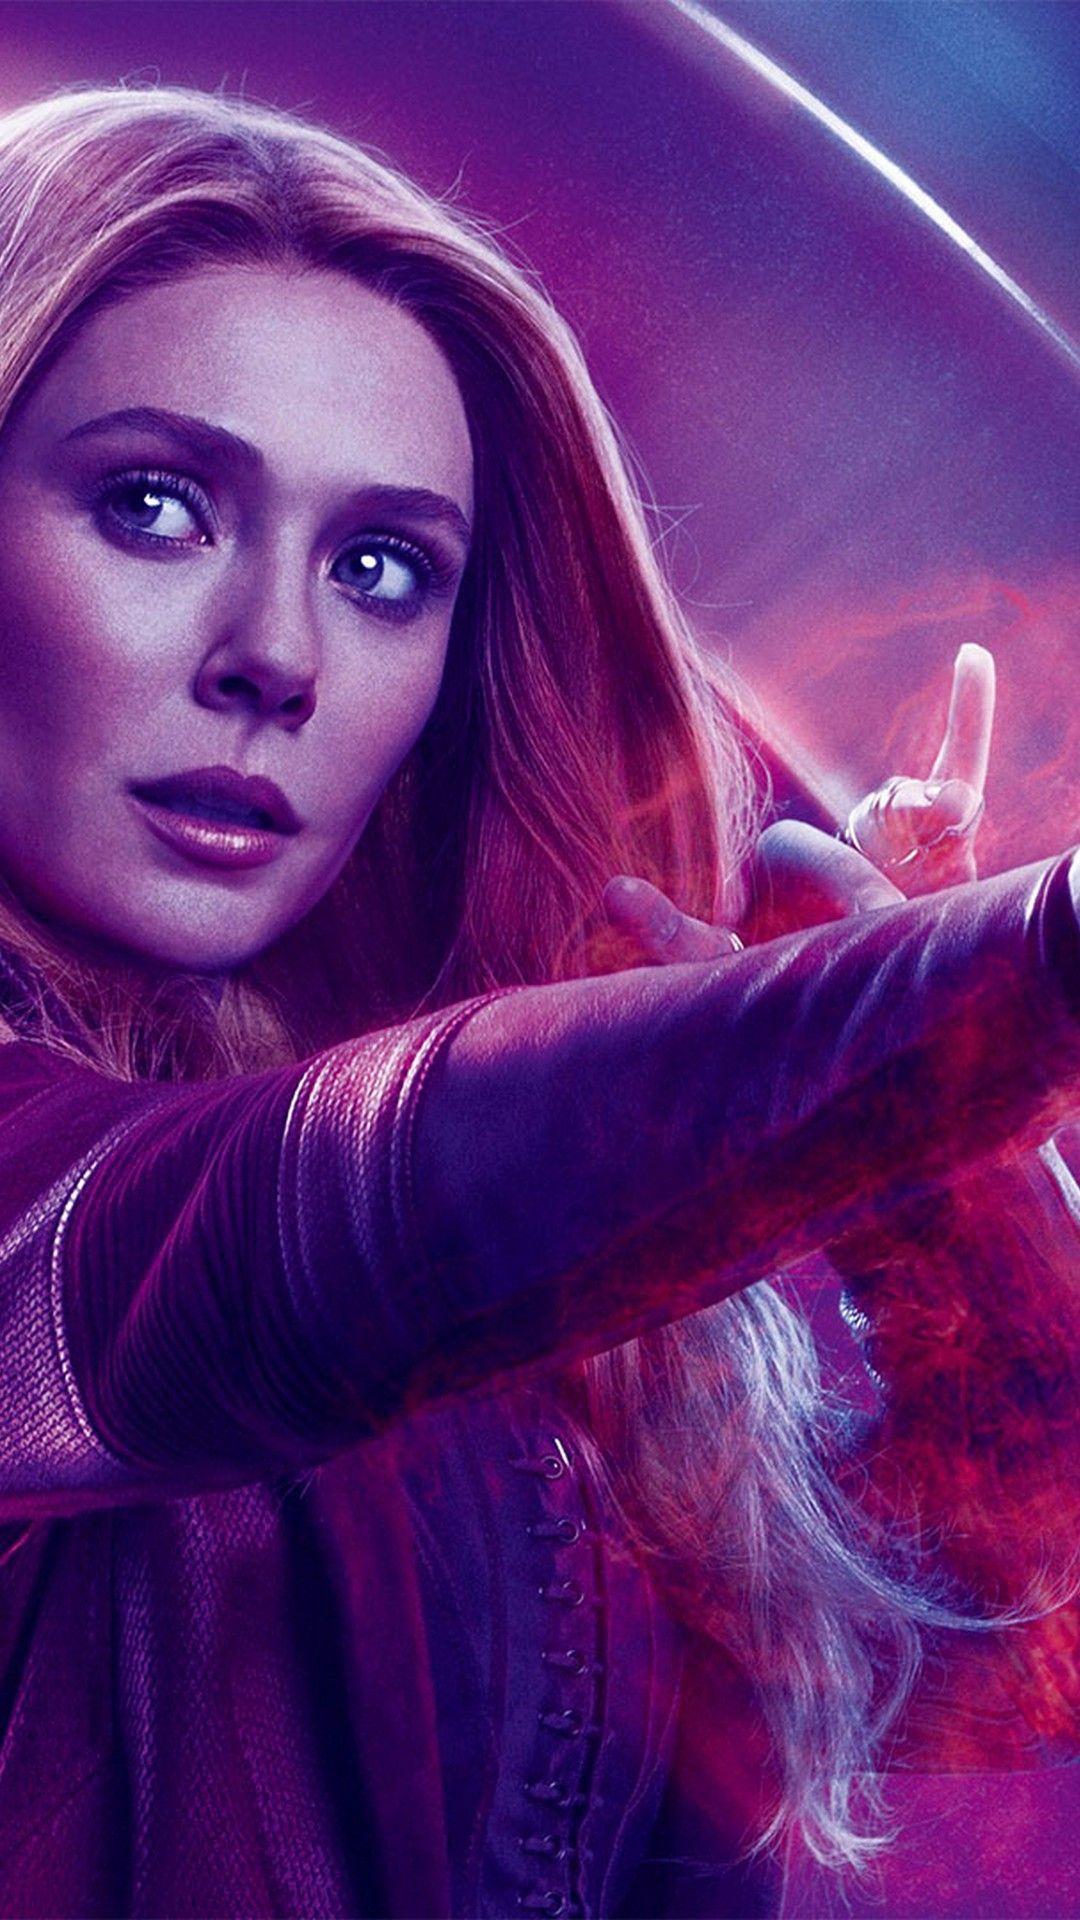 Scarlet Witch Avengers Endgame iPhone Wallpaper Movie Poster Wallpaper HD. Scarlet witch avengers, Witch wallpaper, Scarlet witch